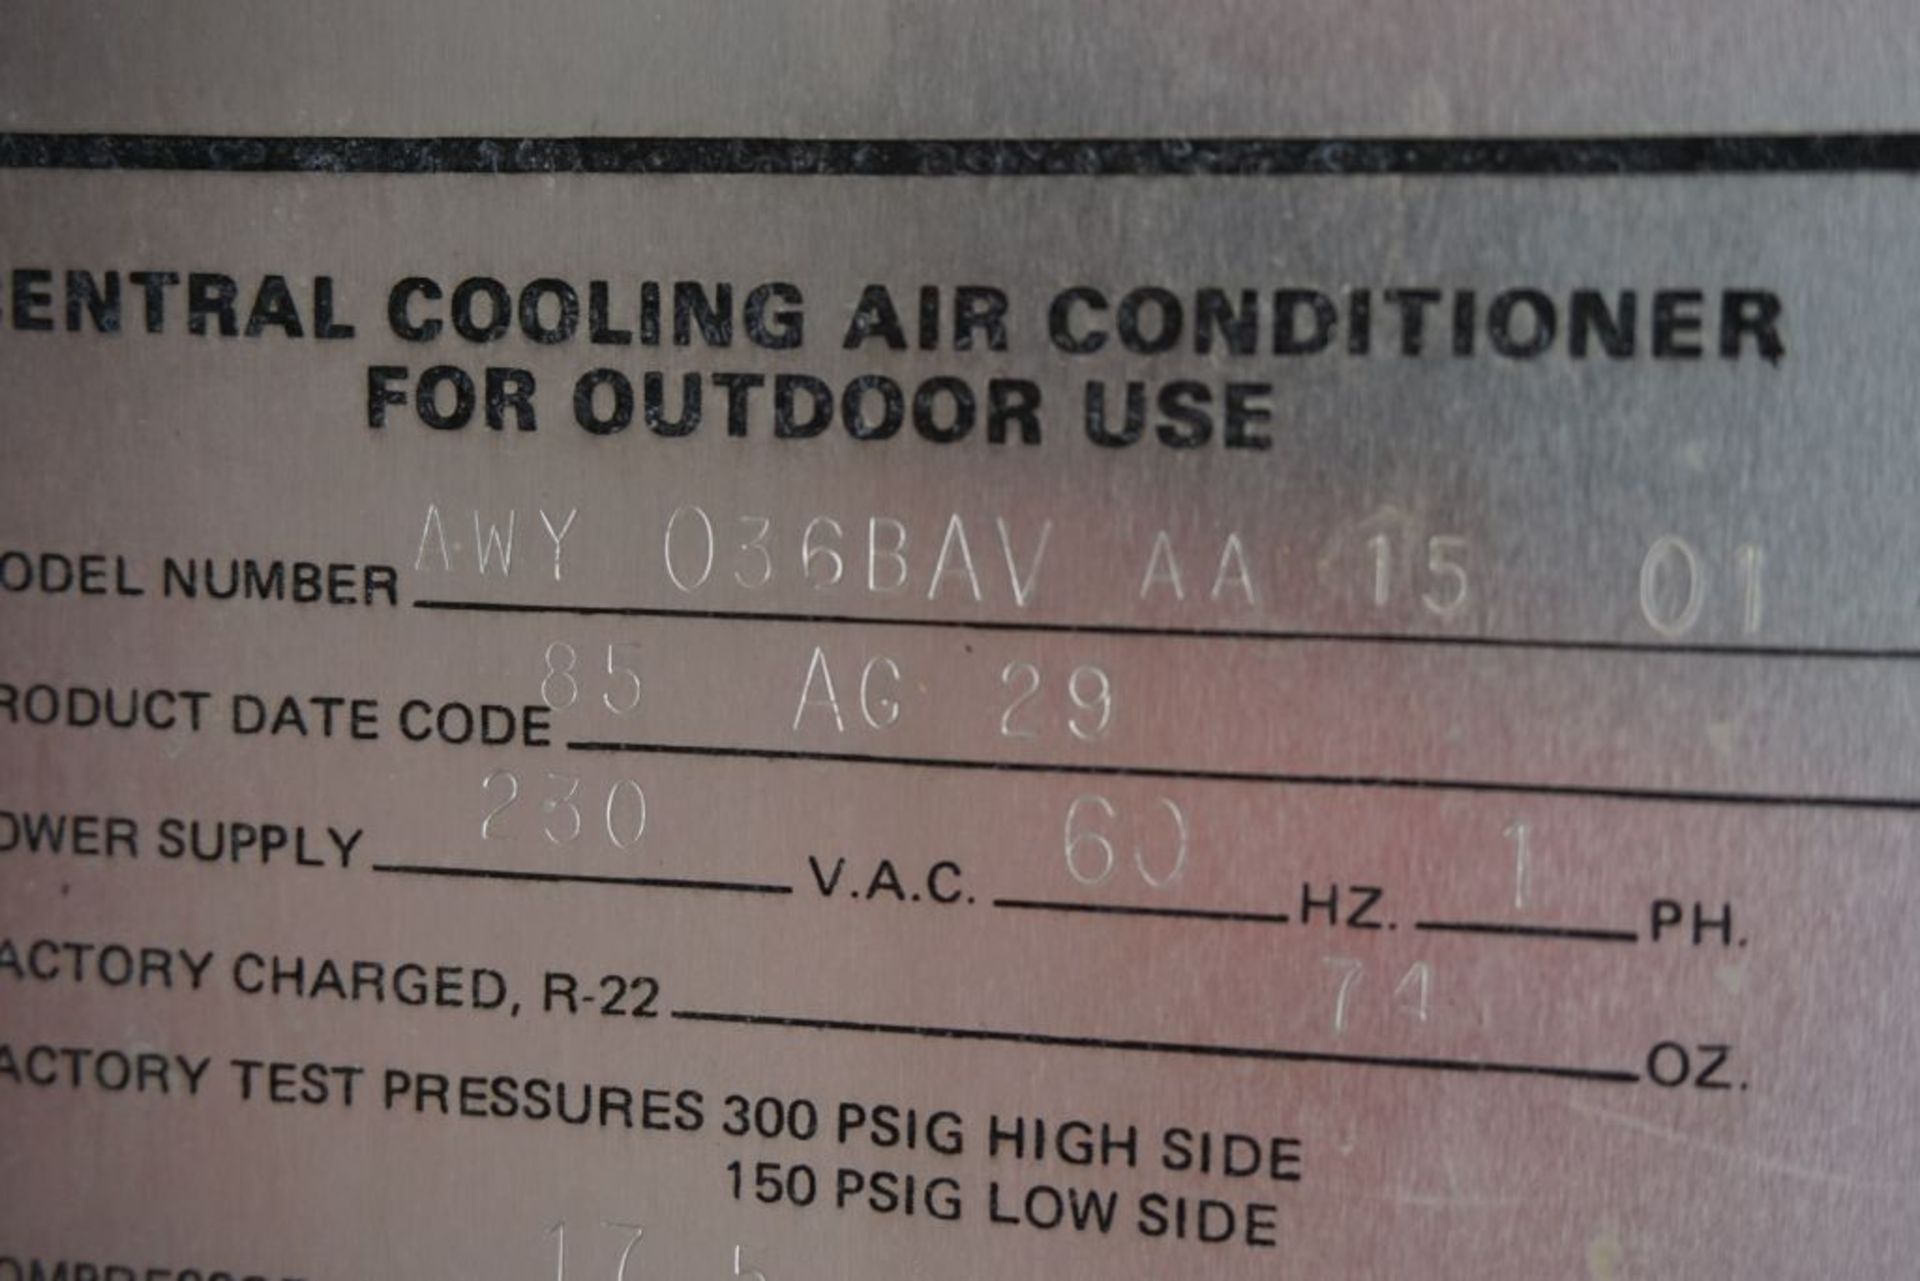 Centrail Cooling Air Conditioner|Model No. AWY 036BAV AA 15 01; 230VAC - Image 11 of 13